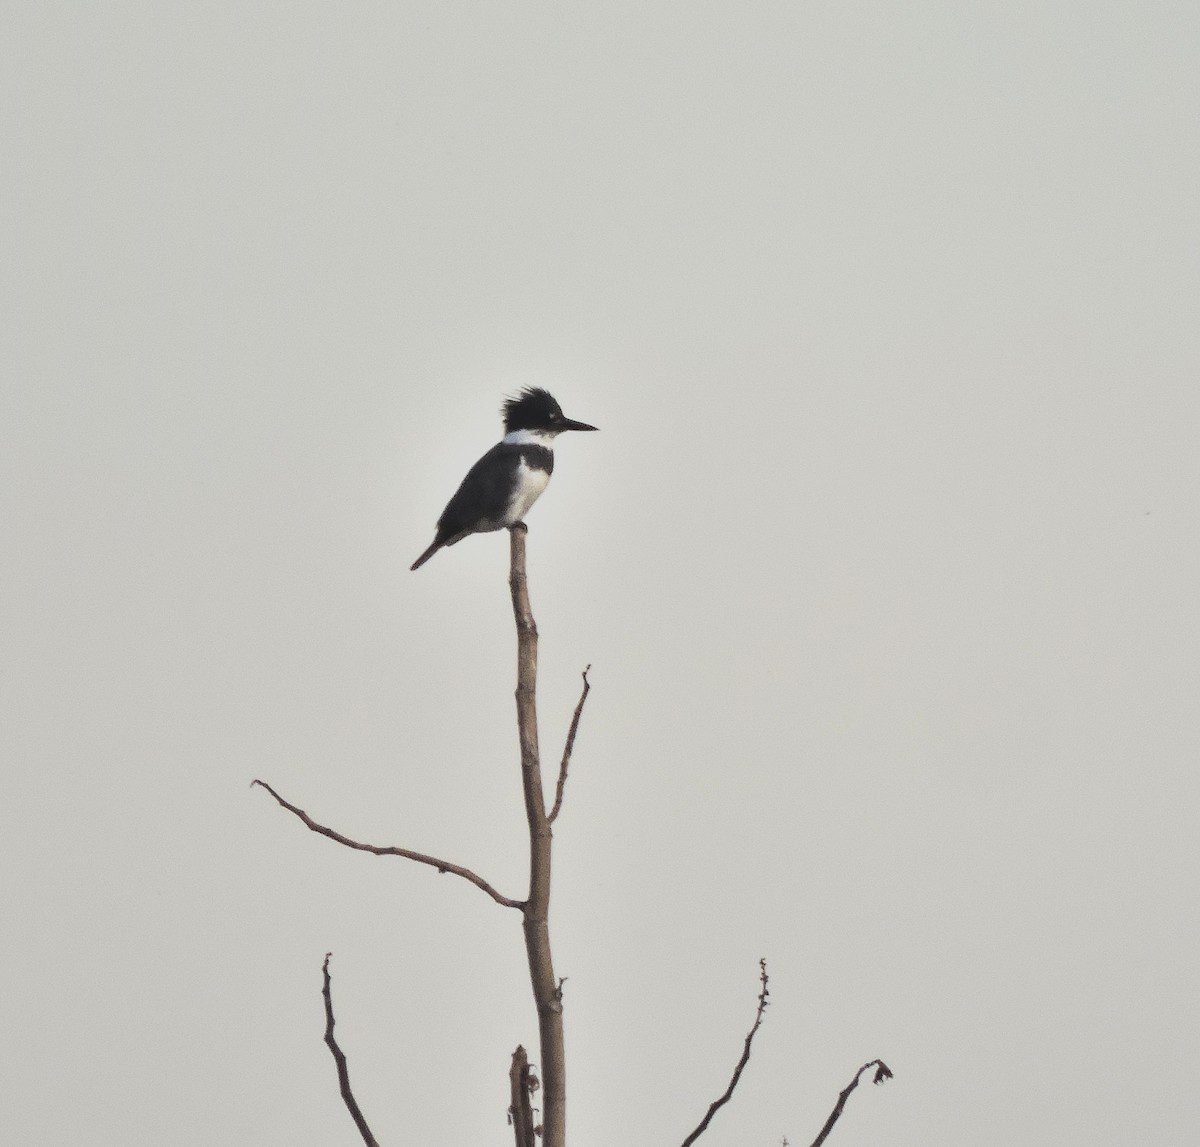 Belted Kingfisher - Nicola Cendron